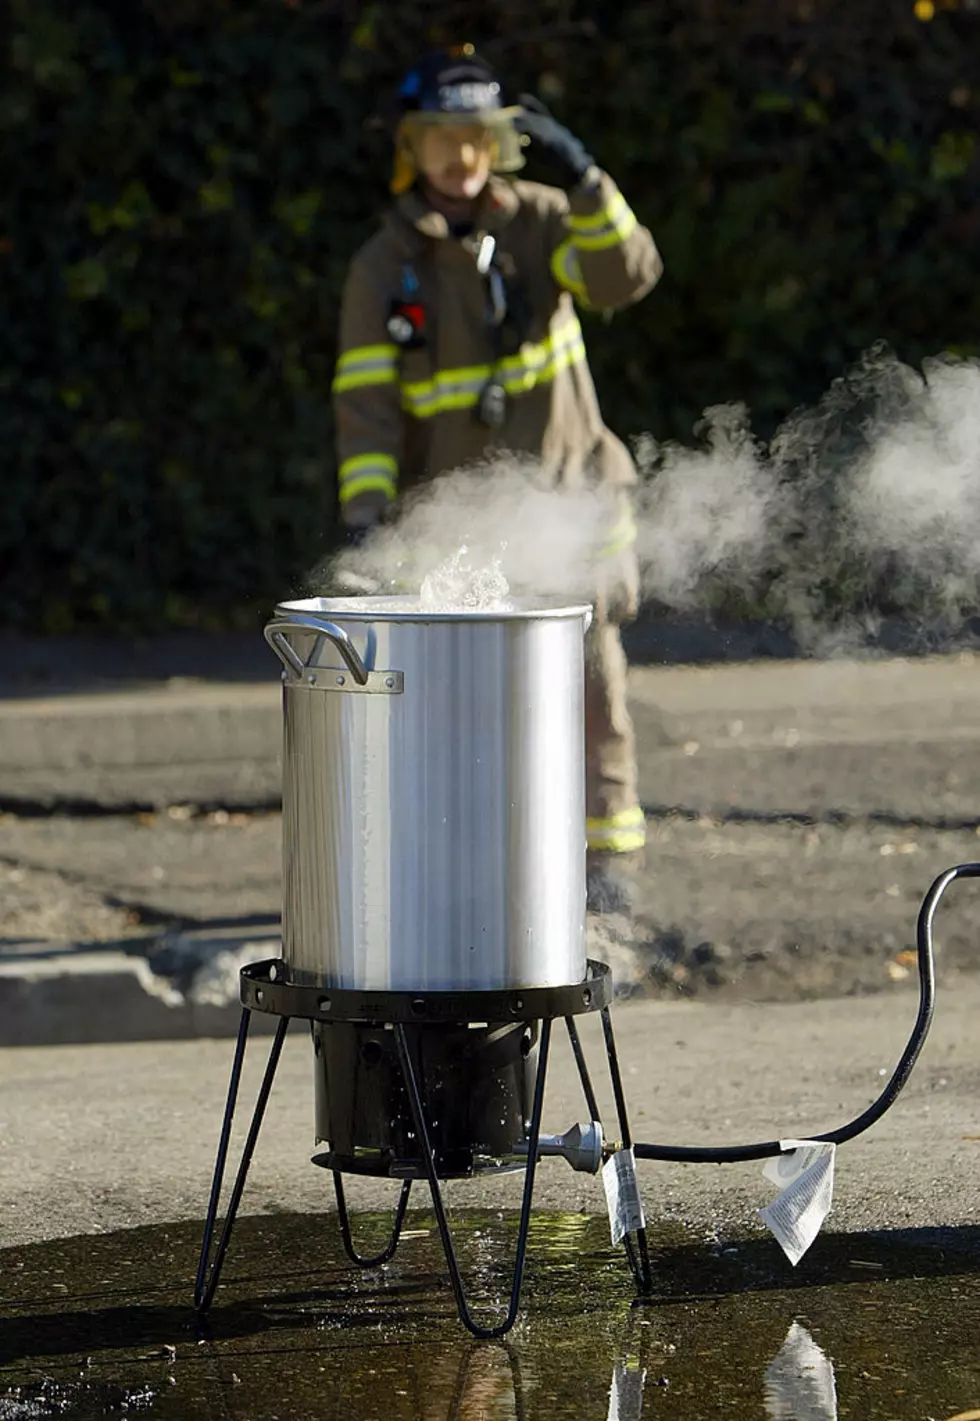 Texas Starts A Lot Of Fires Frying Turkeys. Here’s How Not To.